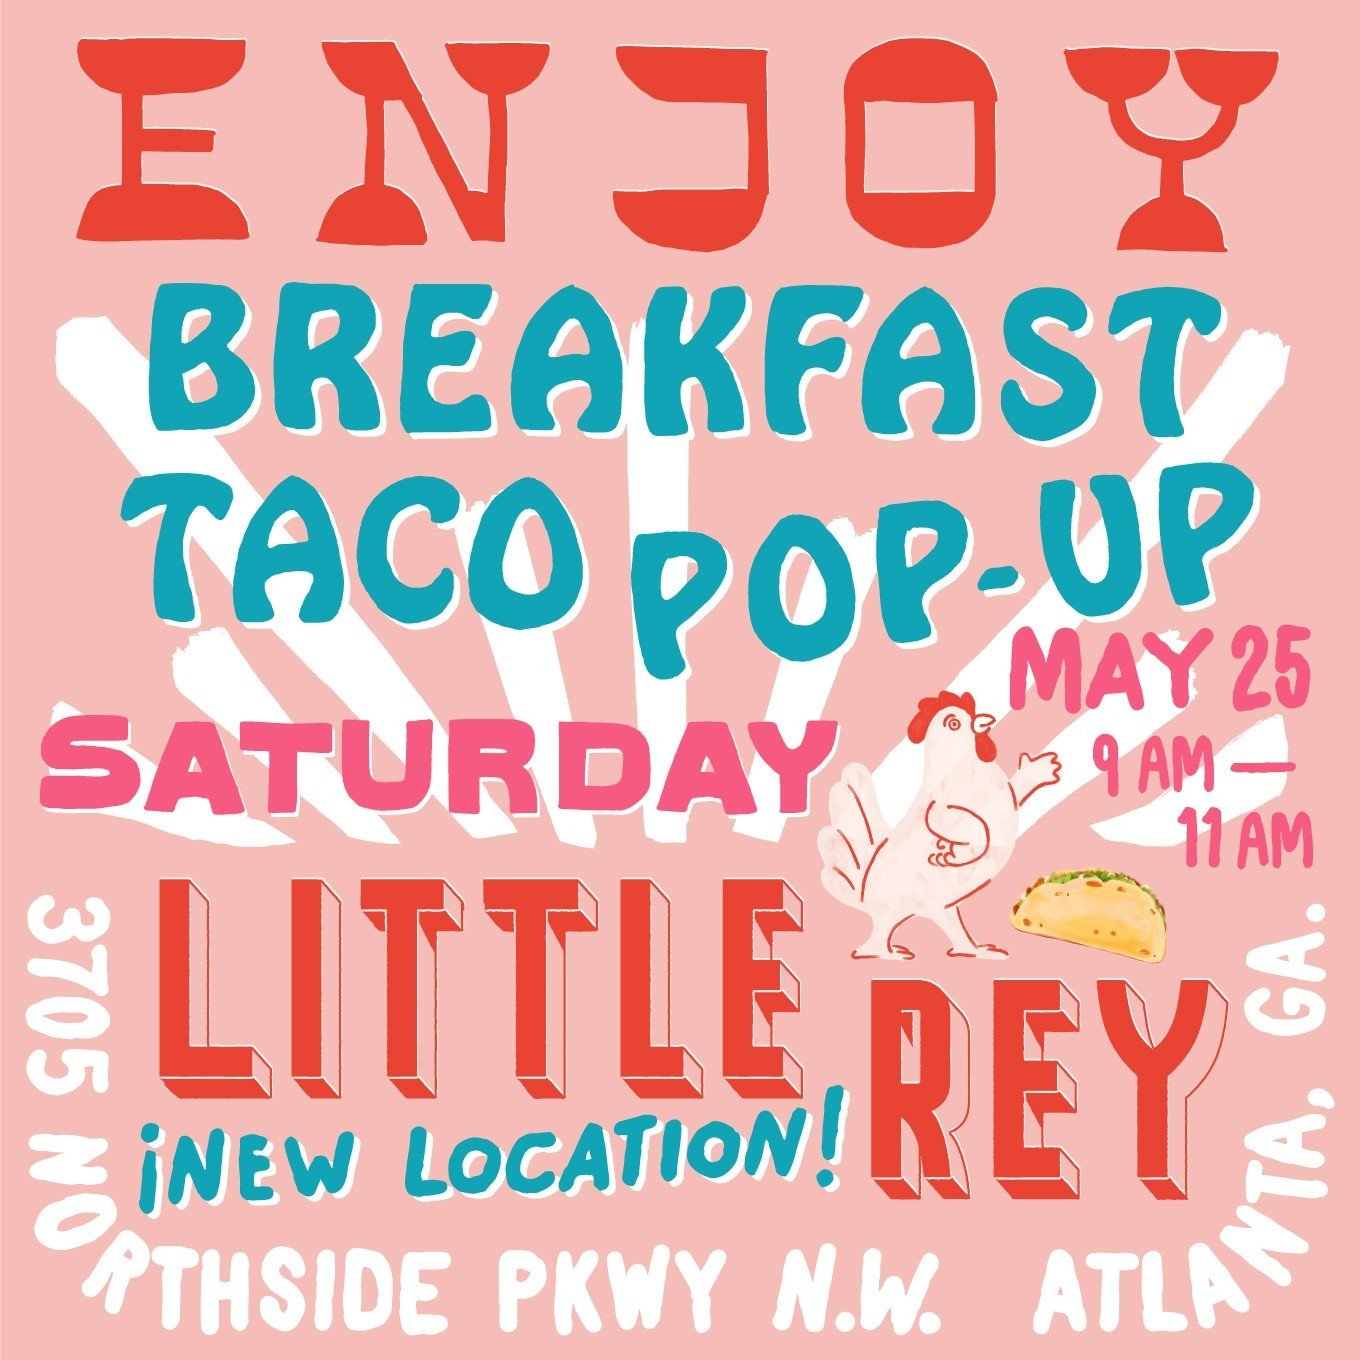 to celebrate our FIRST weekend serving up #littlereyalcarbon brunch, the northcreek location is offering a breakfast taco pop-up‼️ one free breakfast taco per person, with hot cakes, avocado toastadas, beverages and more available for purchase! we ca